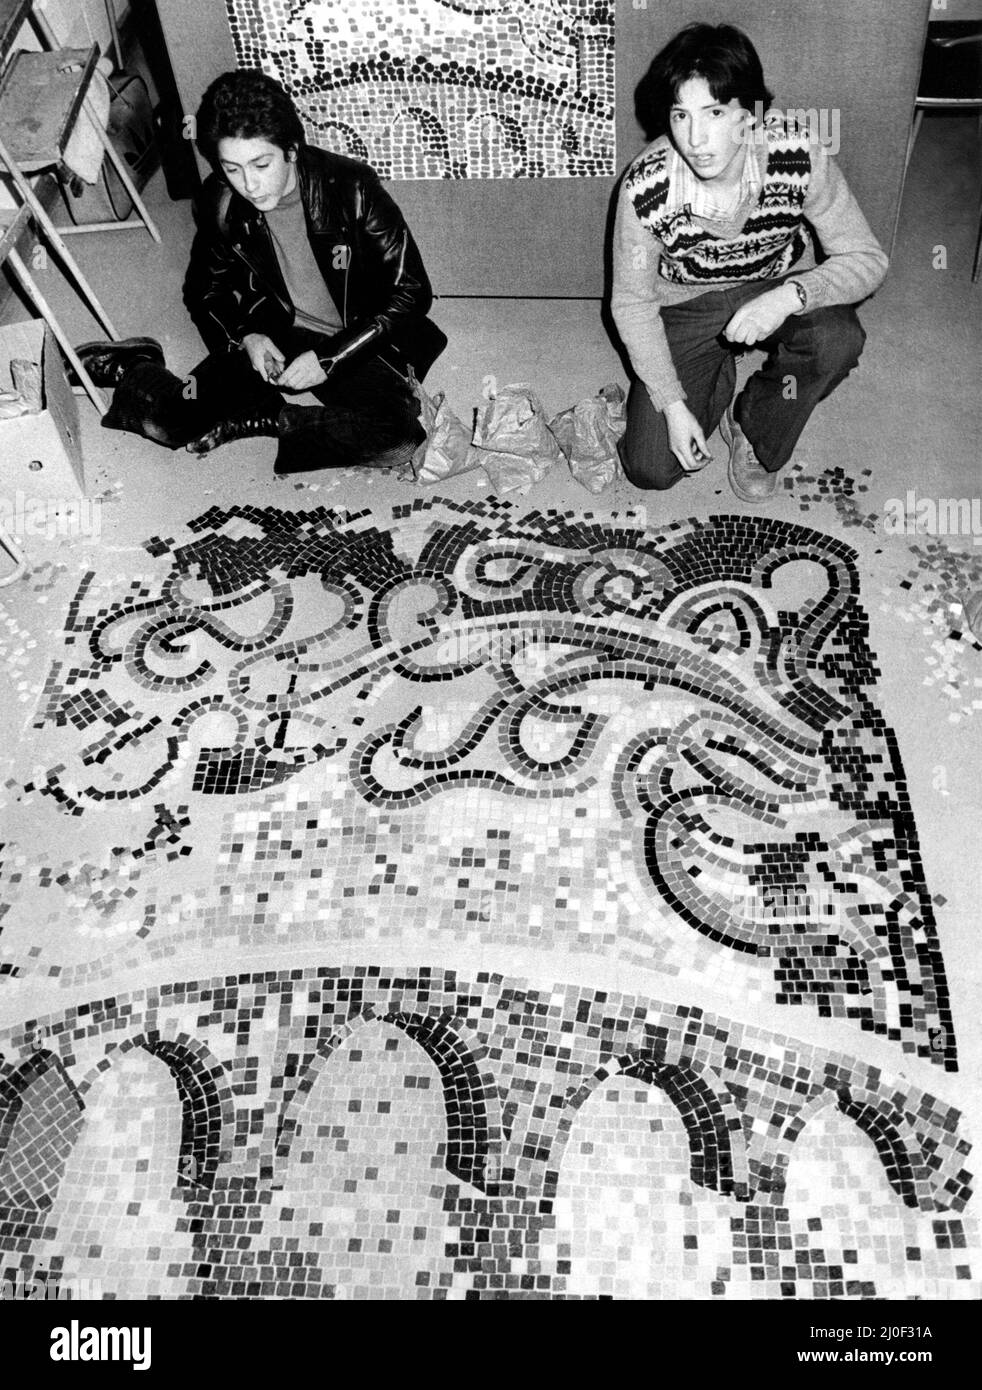 The City of Newcastle 900 Years Anniversary Celebrations 1980 - The anniversary year celebrate the founding of the New Castle in 1080 by Robert Curtois, son of William the Conqueror - West Denton High School pupils Paul Robinson and Graham Smith have just finished a six-foot square mosaic in the subway beneath Jesmond Road. 26th February, 1980 Stock Photo